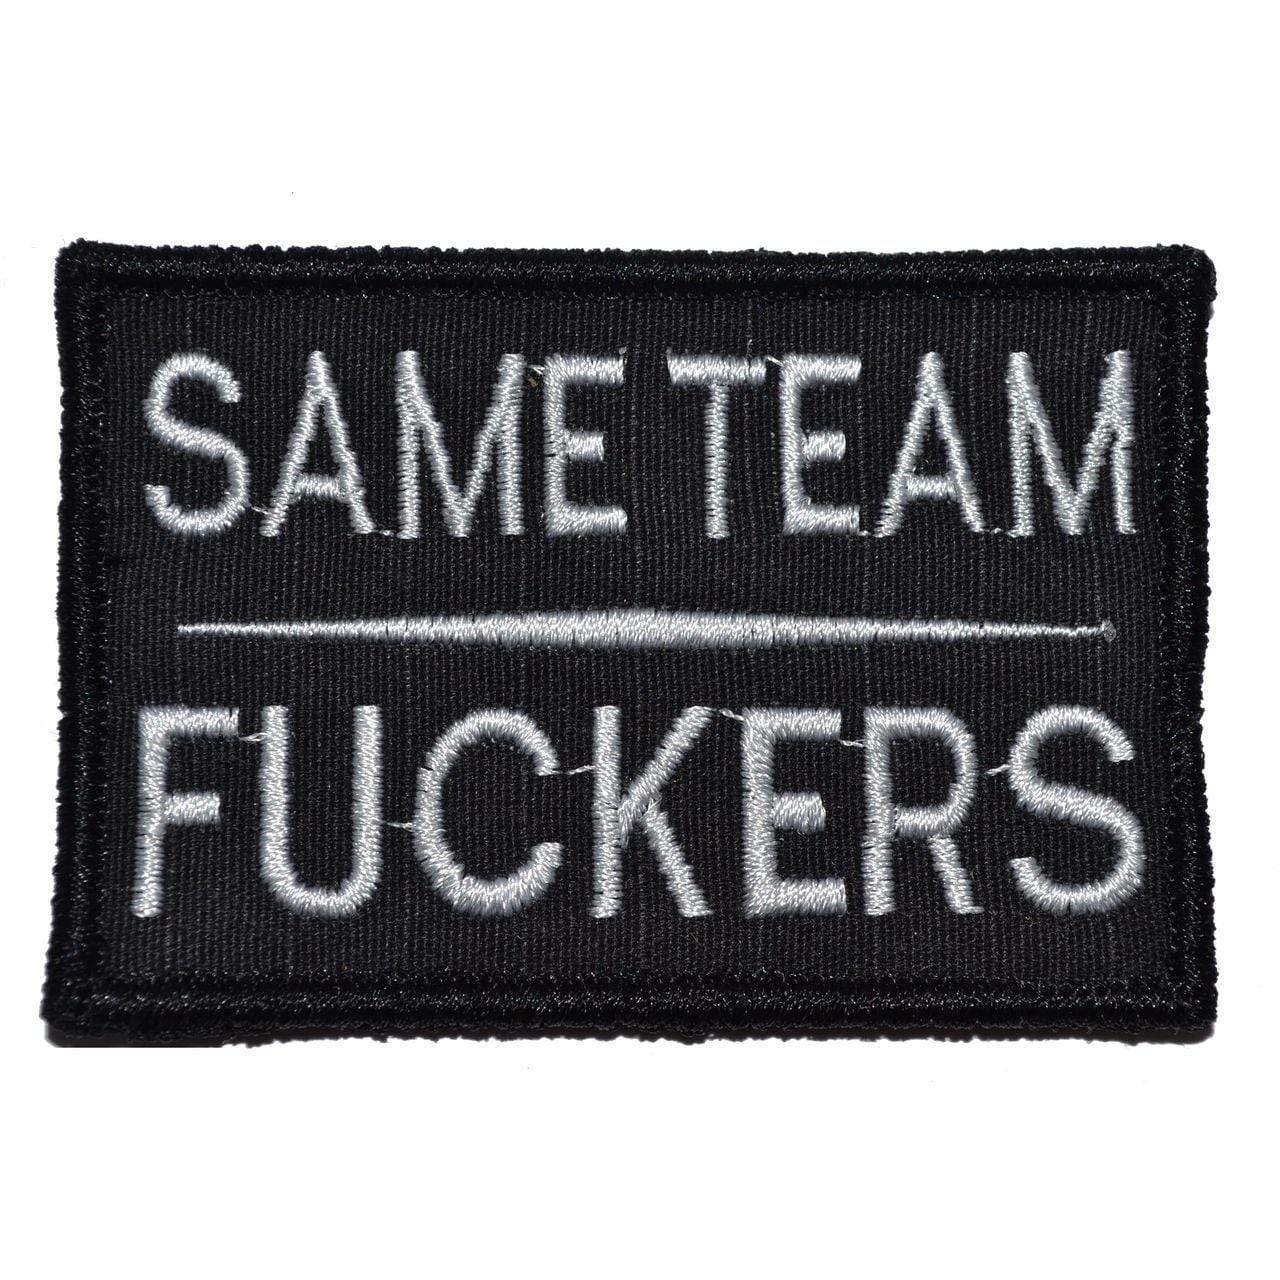 Tactical Gear Junkie Patches Black Same Team Fuckers - 2x3 Patch